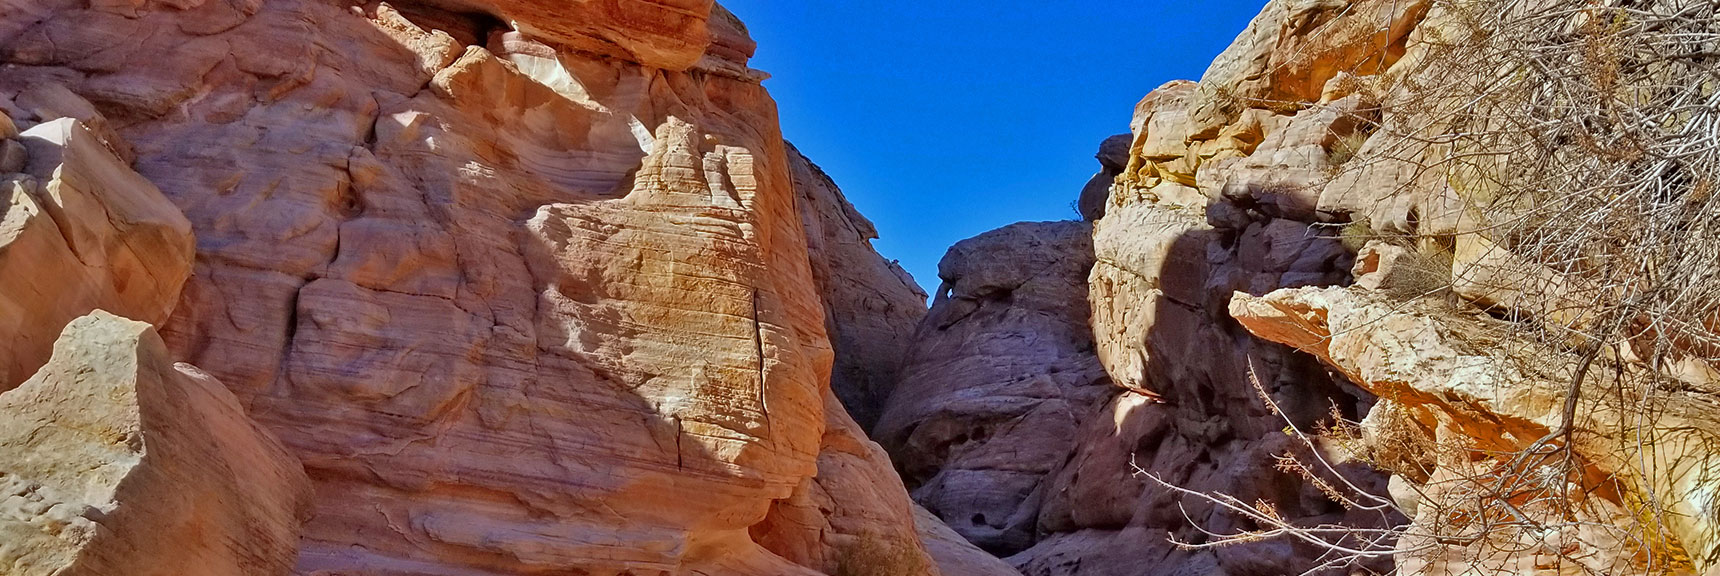 Entering the Slot Canyon on White Domes Loop Trail in Valley of Fire State Park, Nevada